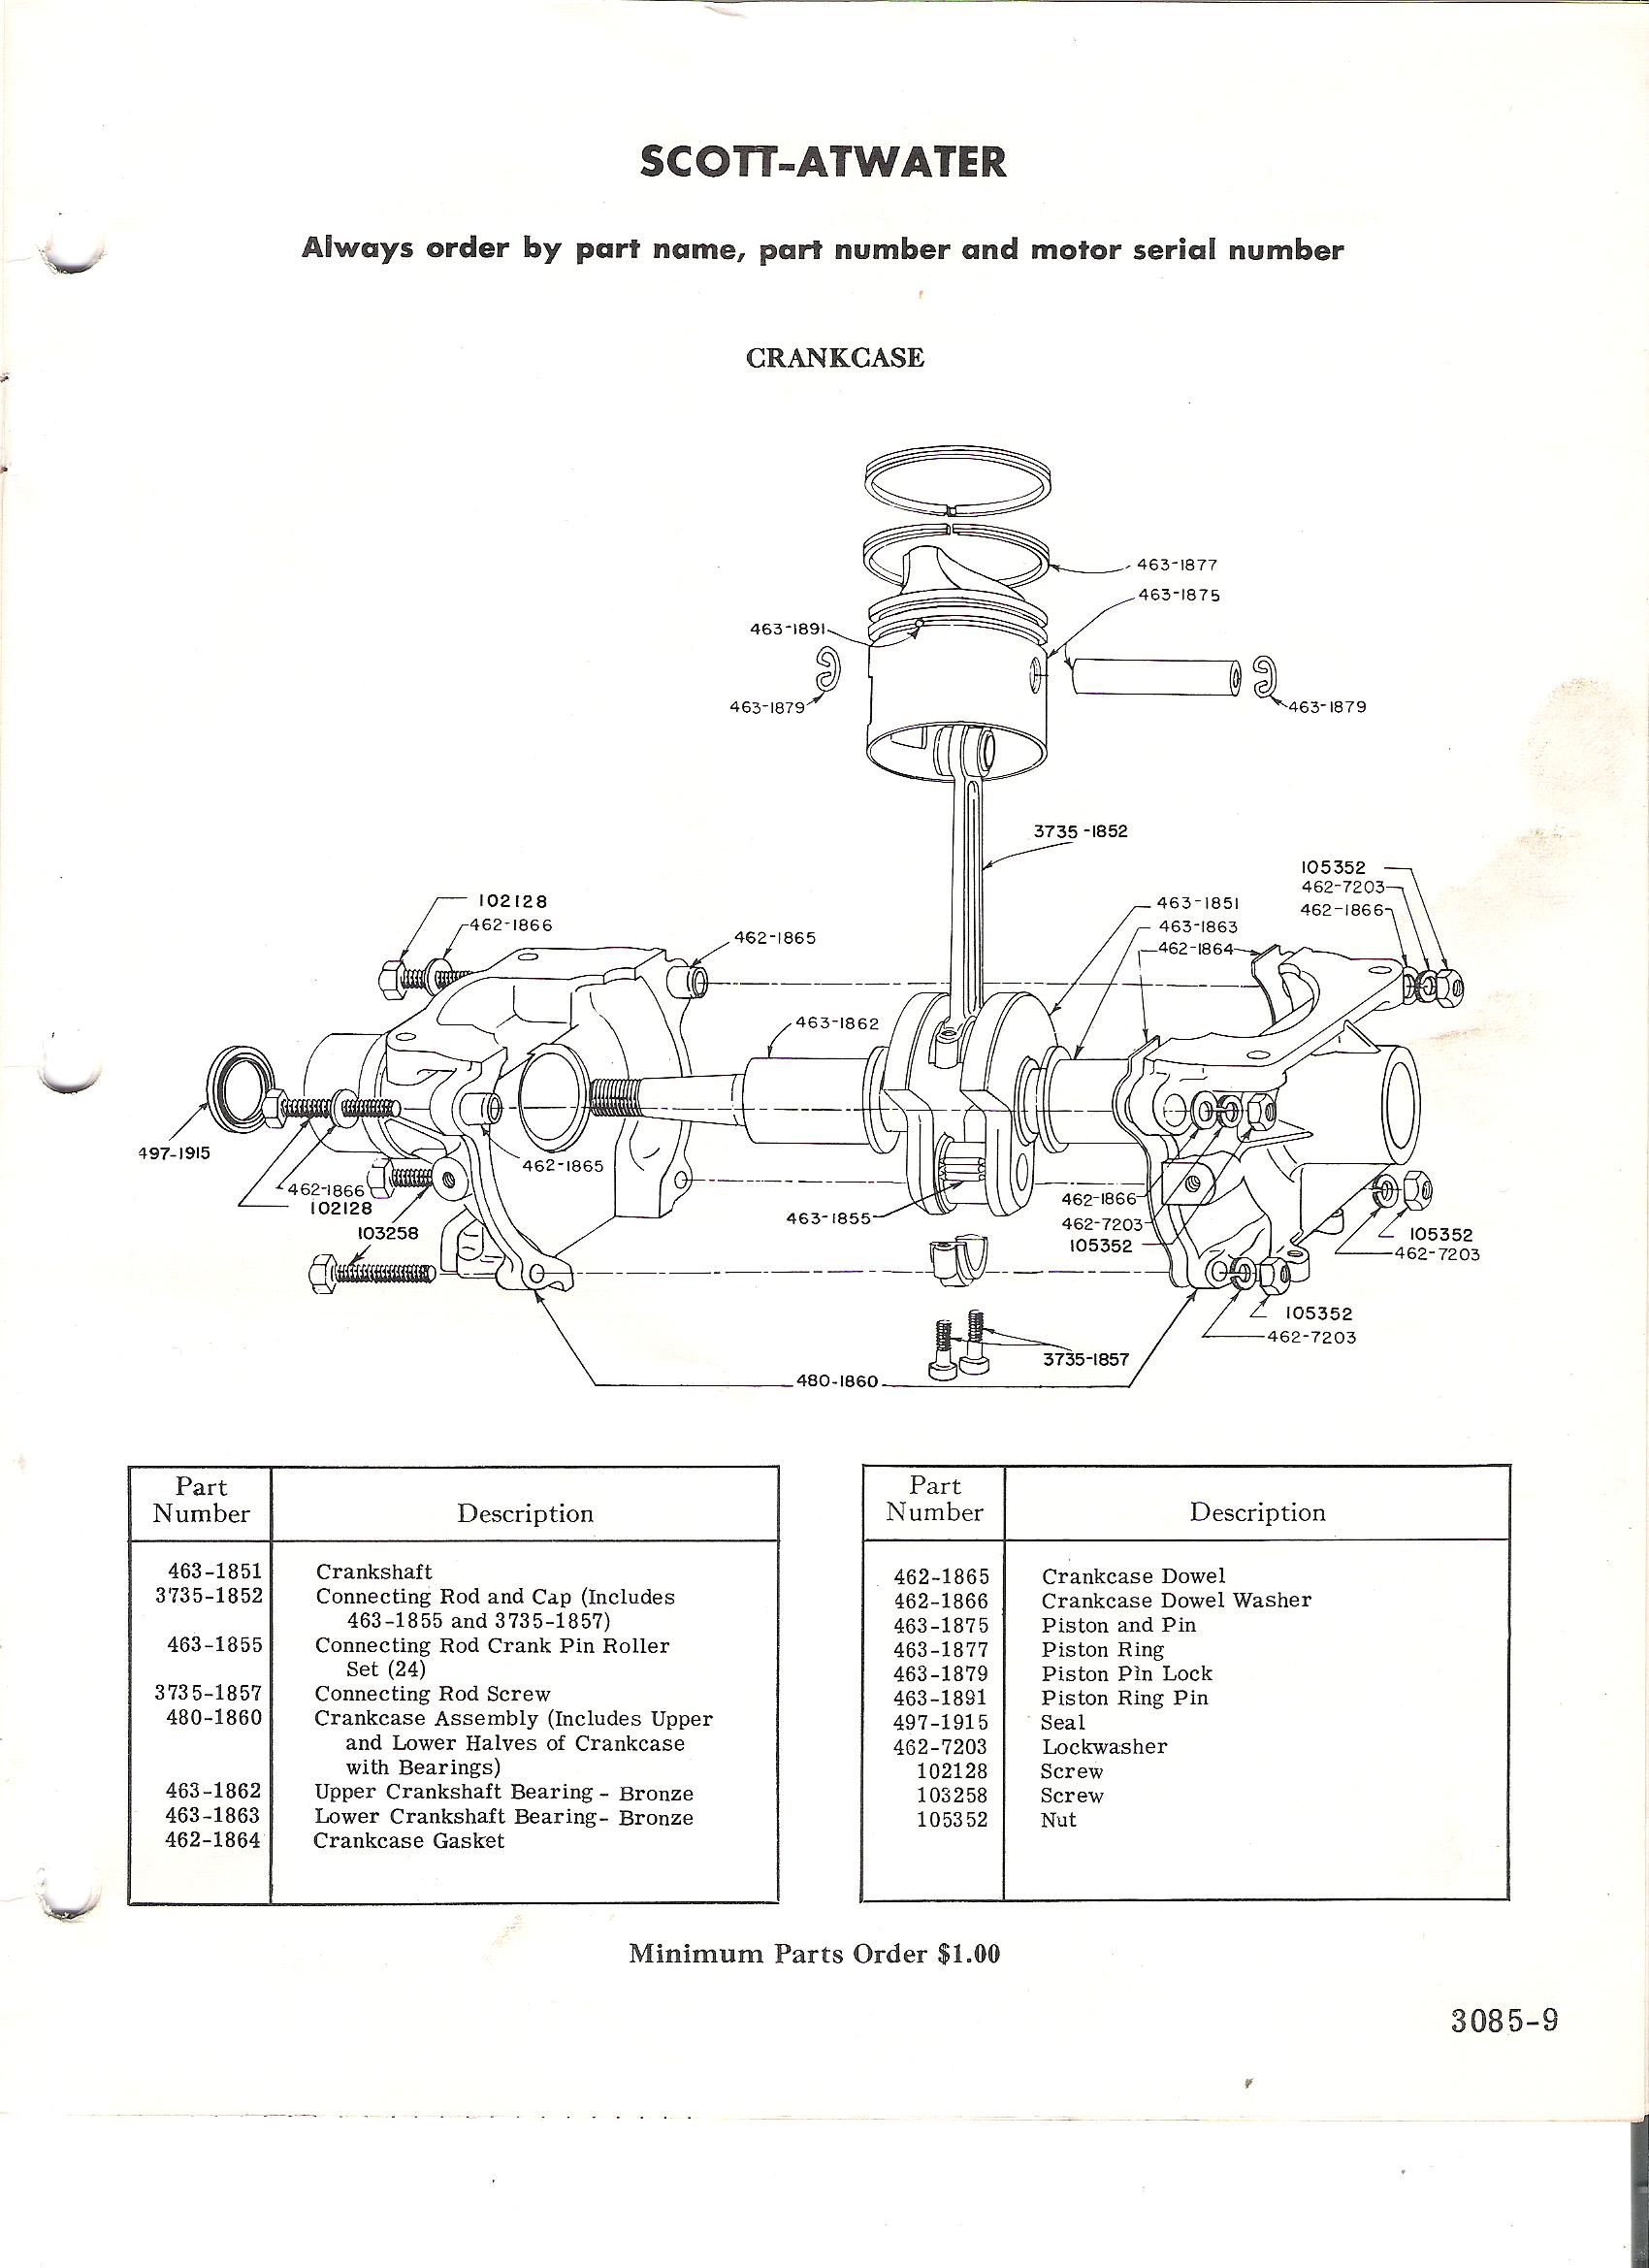 3.6 HP Sportster Scott-Atwater Outboard Motor Parts Catalog Manual 